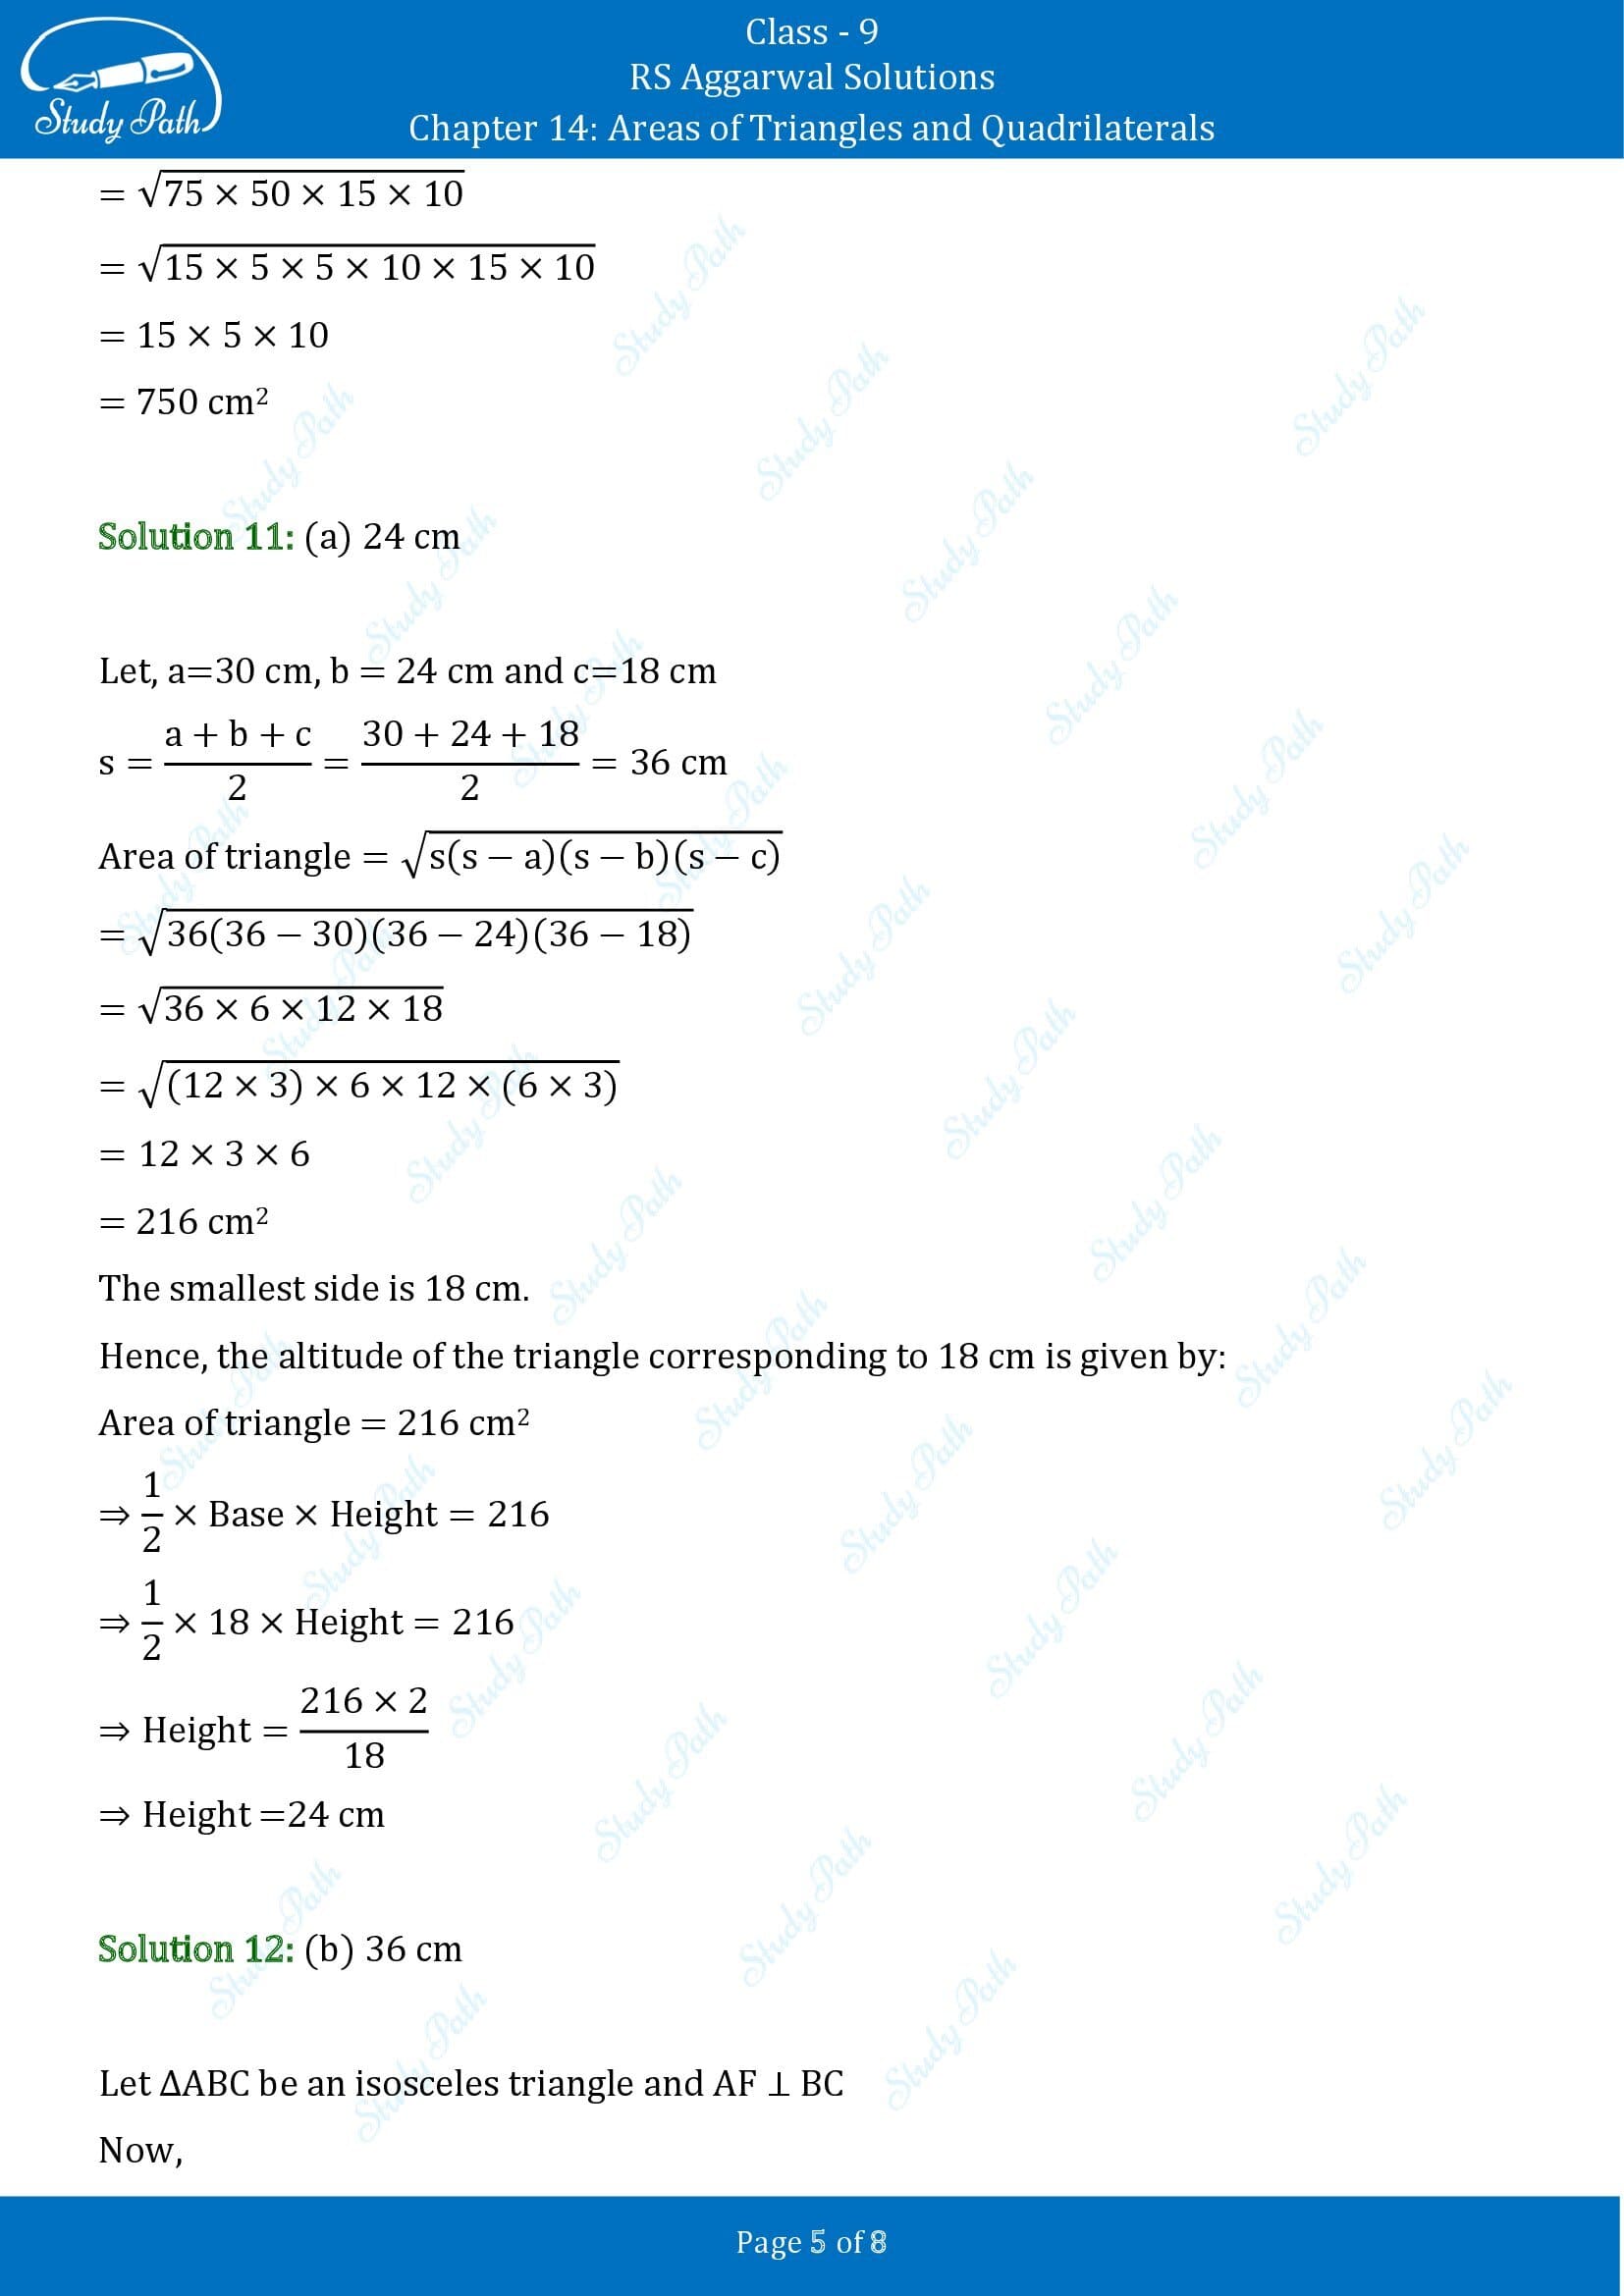 RS Aggarwal Solutions Class 9 Chapter 14 Areas of Triangles and Quadrilaterals Multiple Choice Questions MCQs 00005